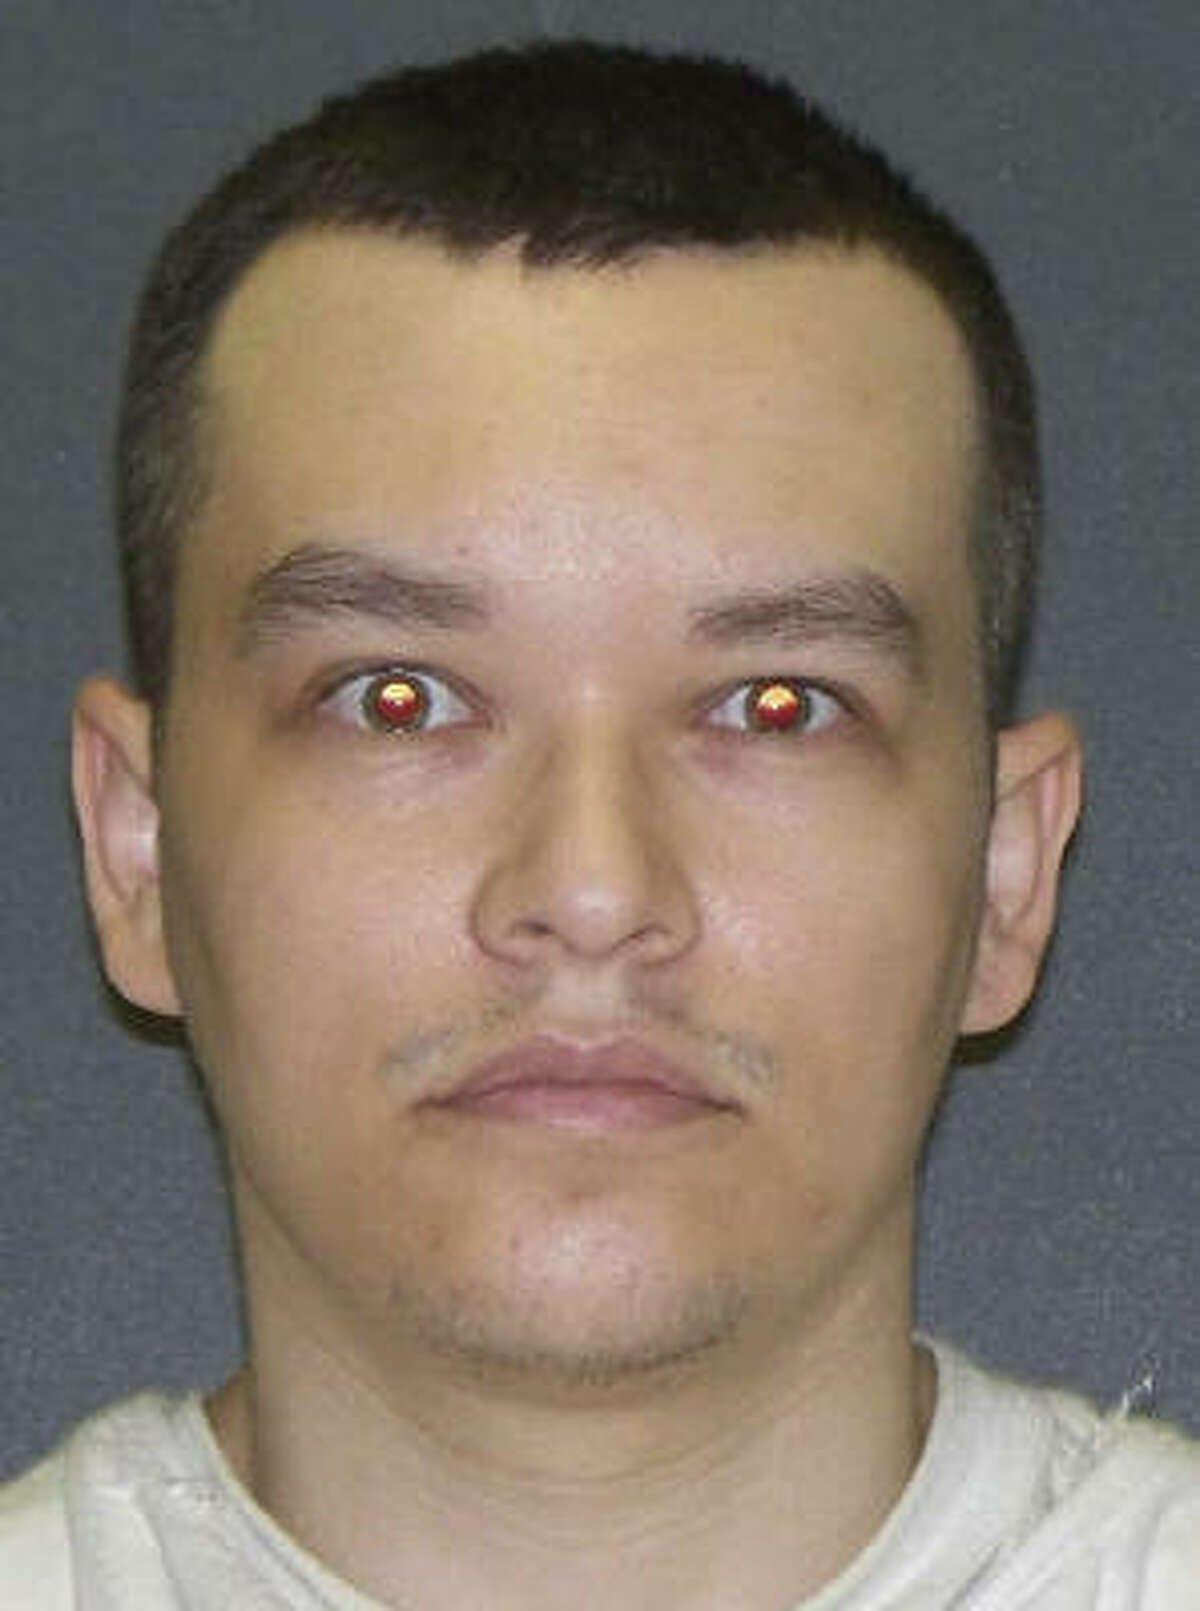 Khristian Oliver is scheduled for execution by lethal injection at today in Huntsville.